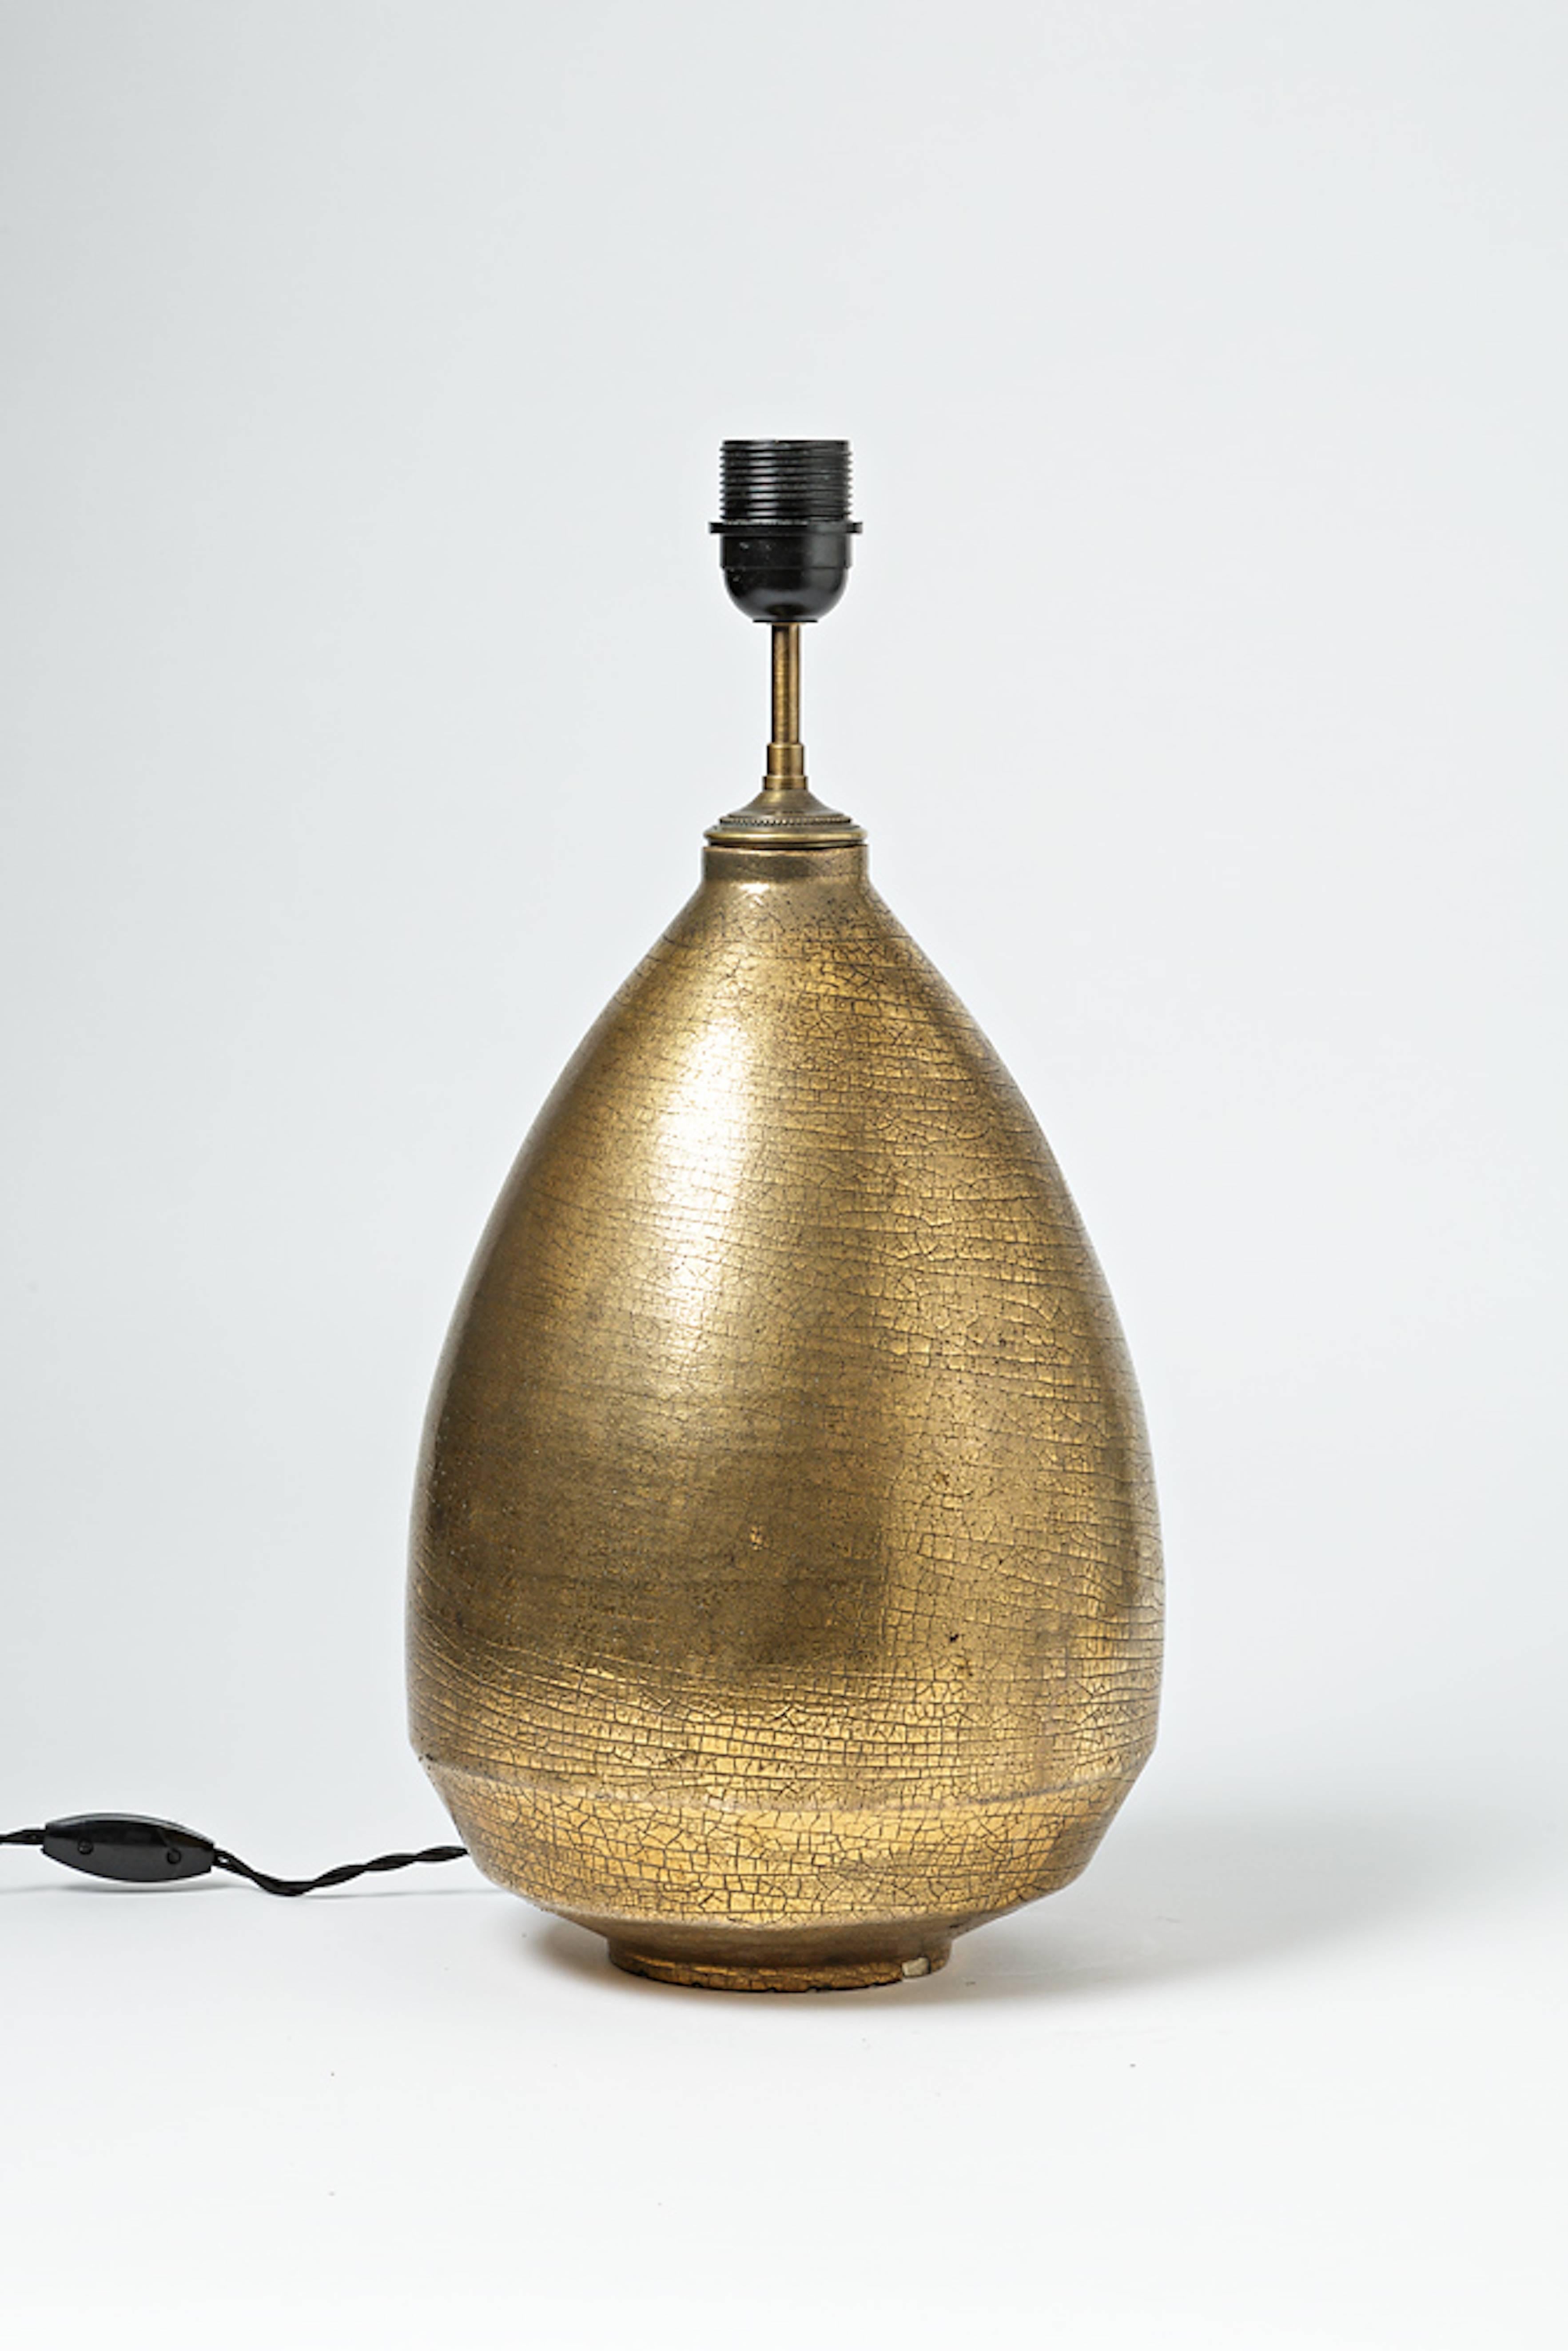 Beaux Arts Important Ceramic Lamp with Gold Glaze by Marcel Guillard, circa 1930